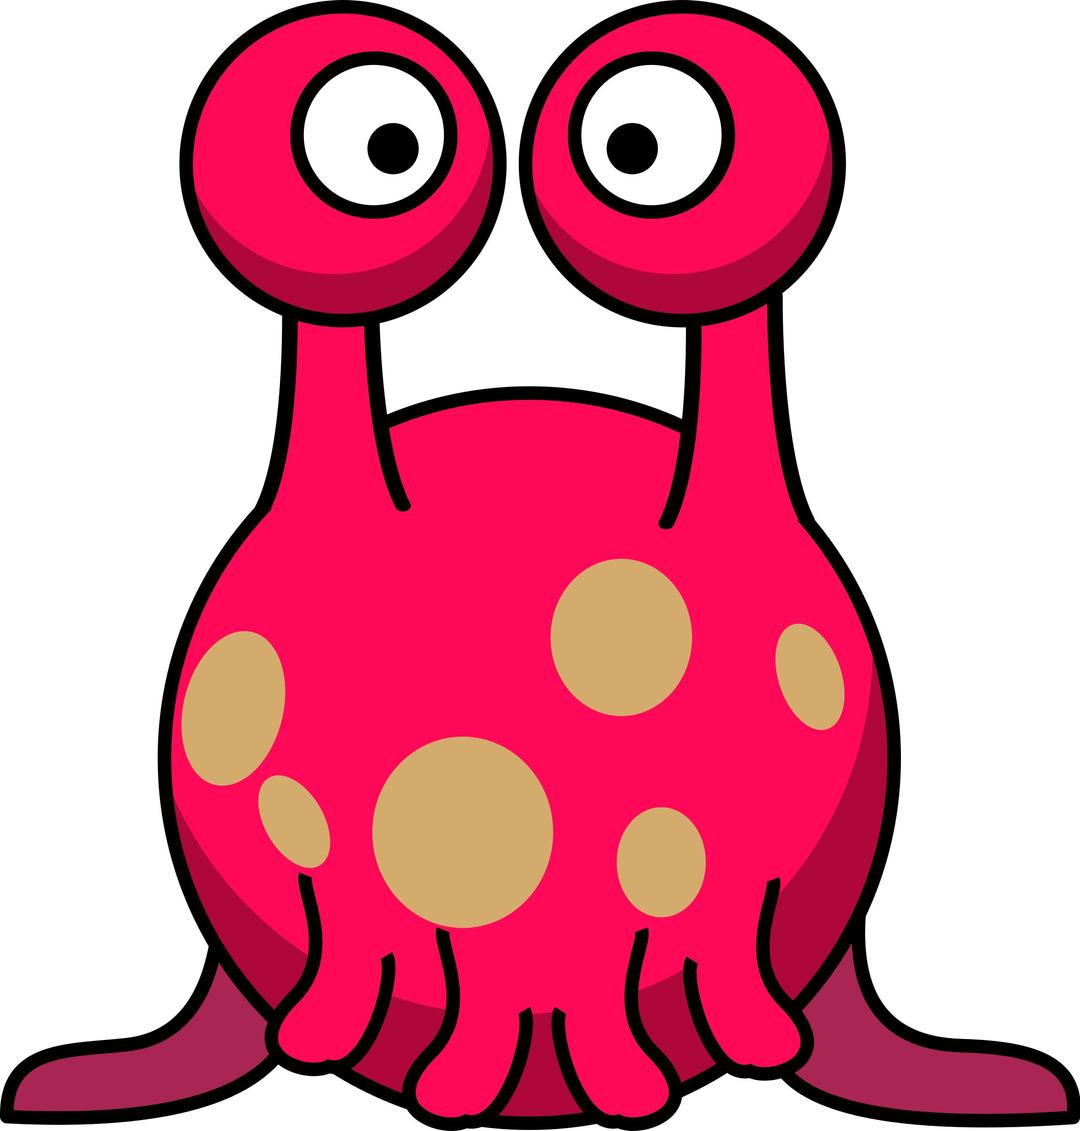 Silly alien in the style of Lemmling png transparent